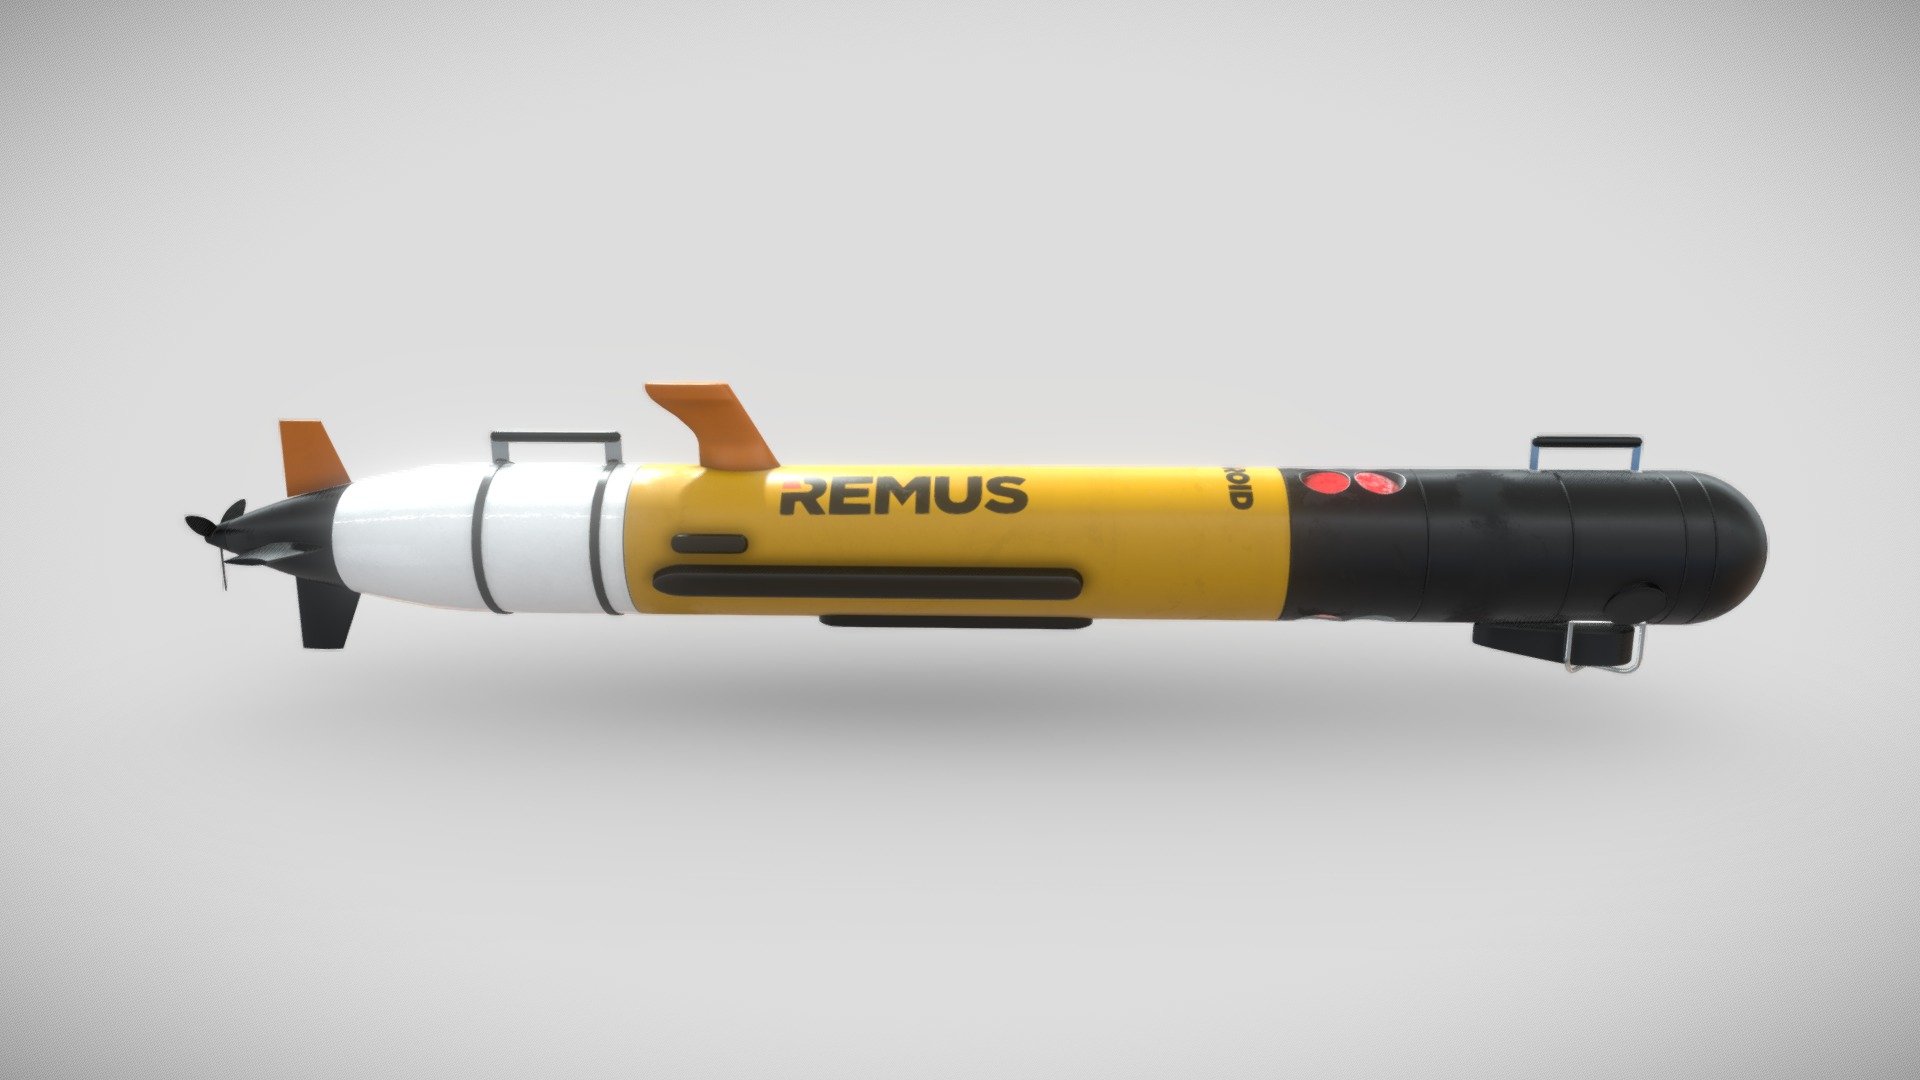 The Remus 100 is a AUV developed by Kongsberg 3d model